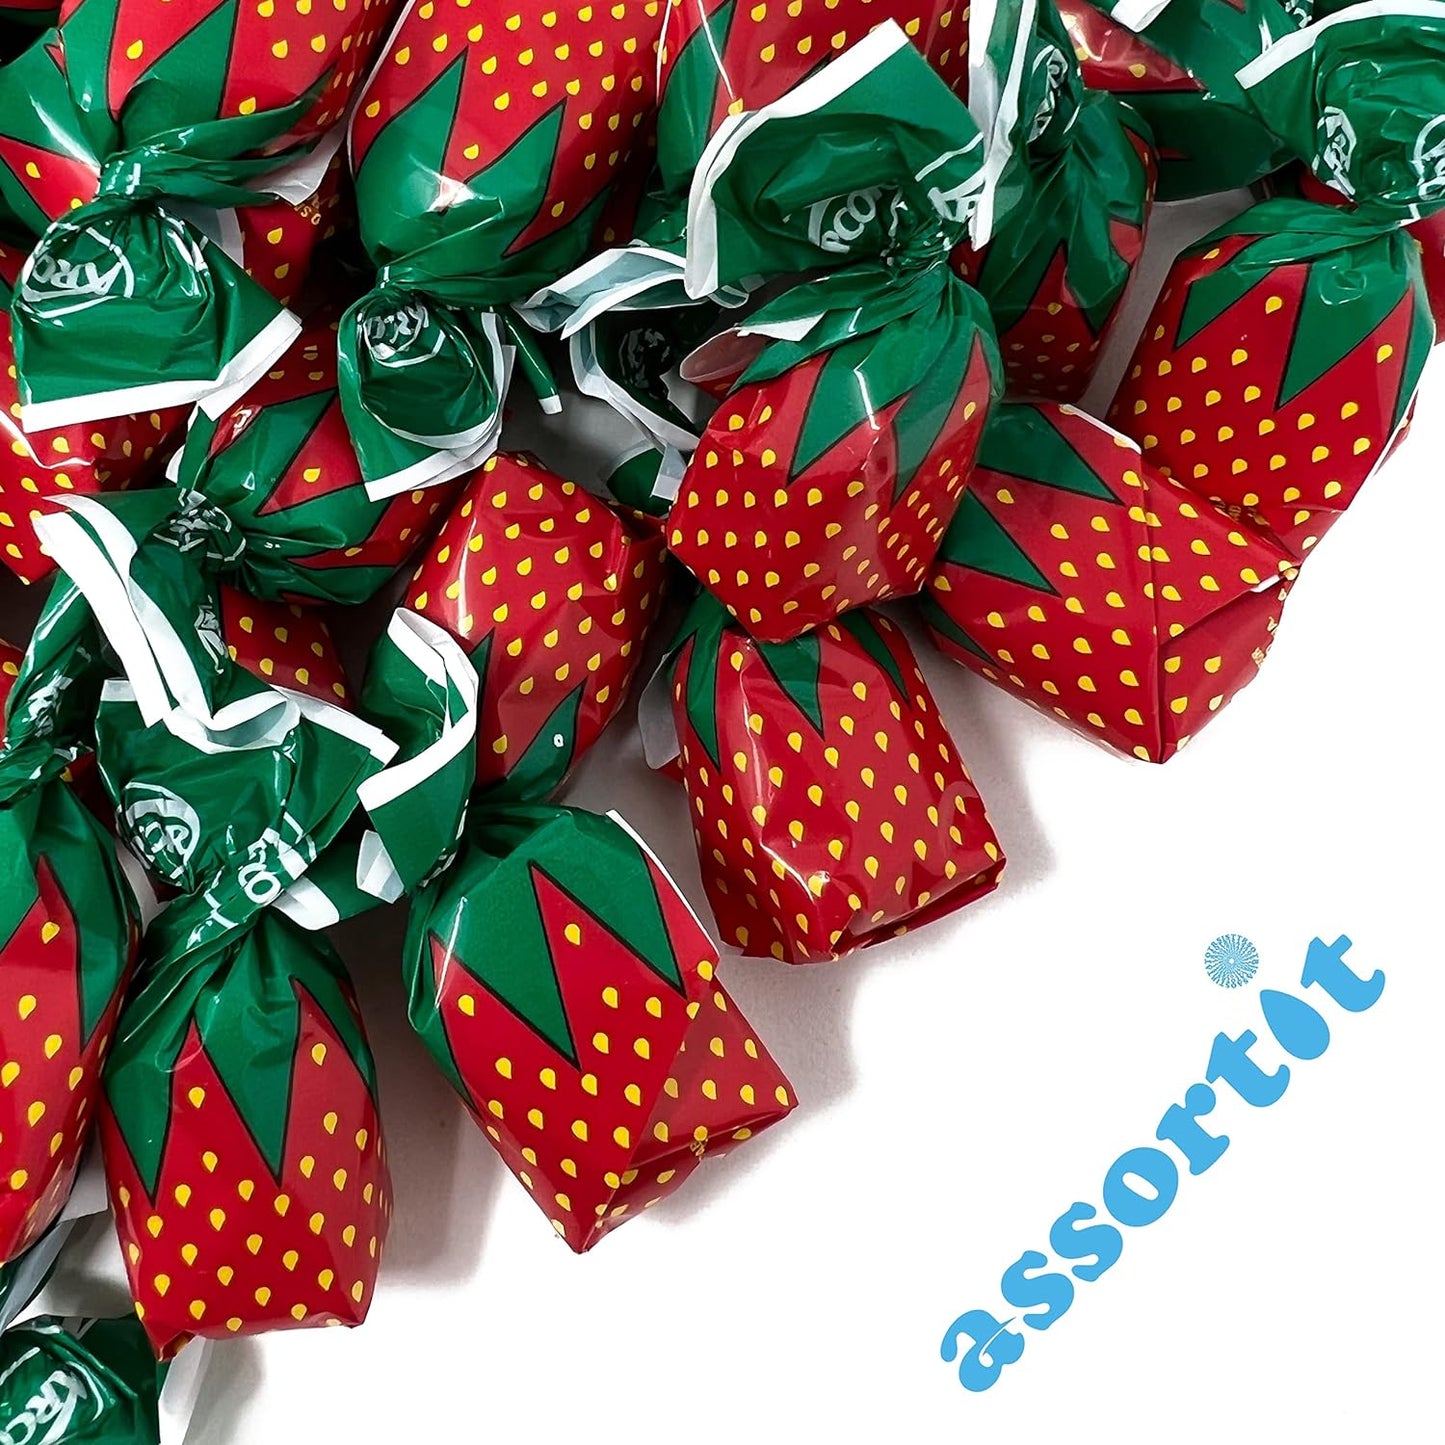 Arcor Strawberry Filled Hard Candy - 3 lbs Classic Strawberry Flavored Filled With Chewy Strawberry Center  (48 oz)